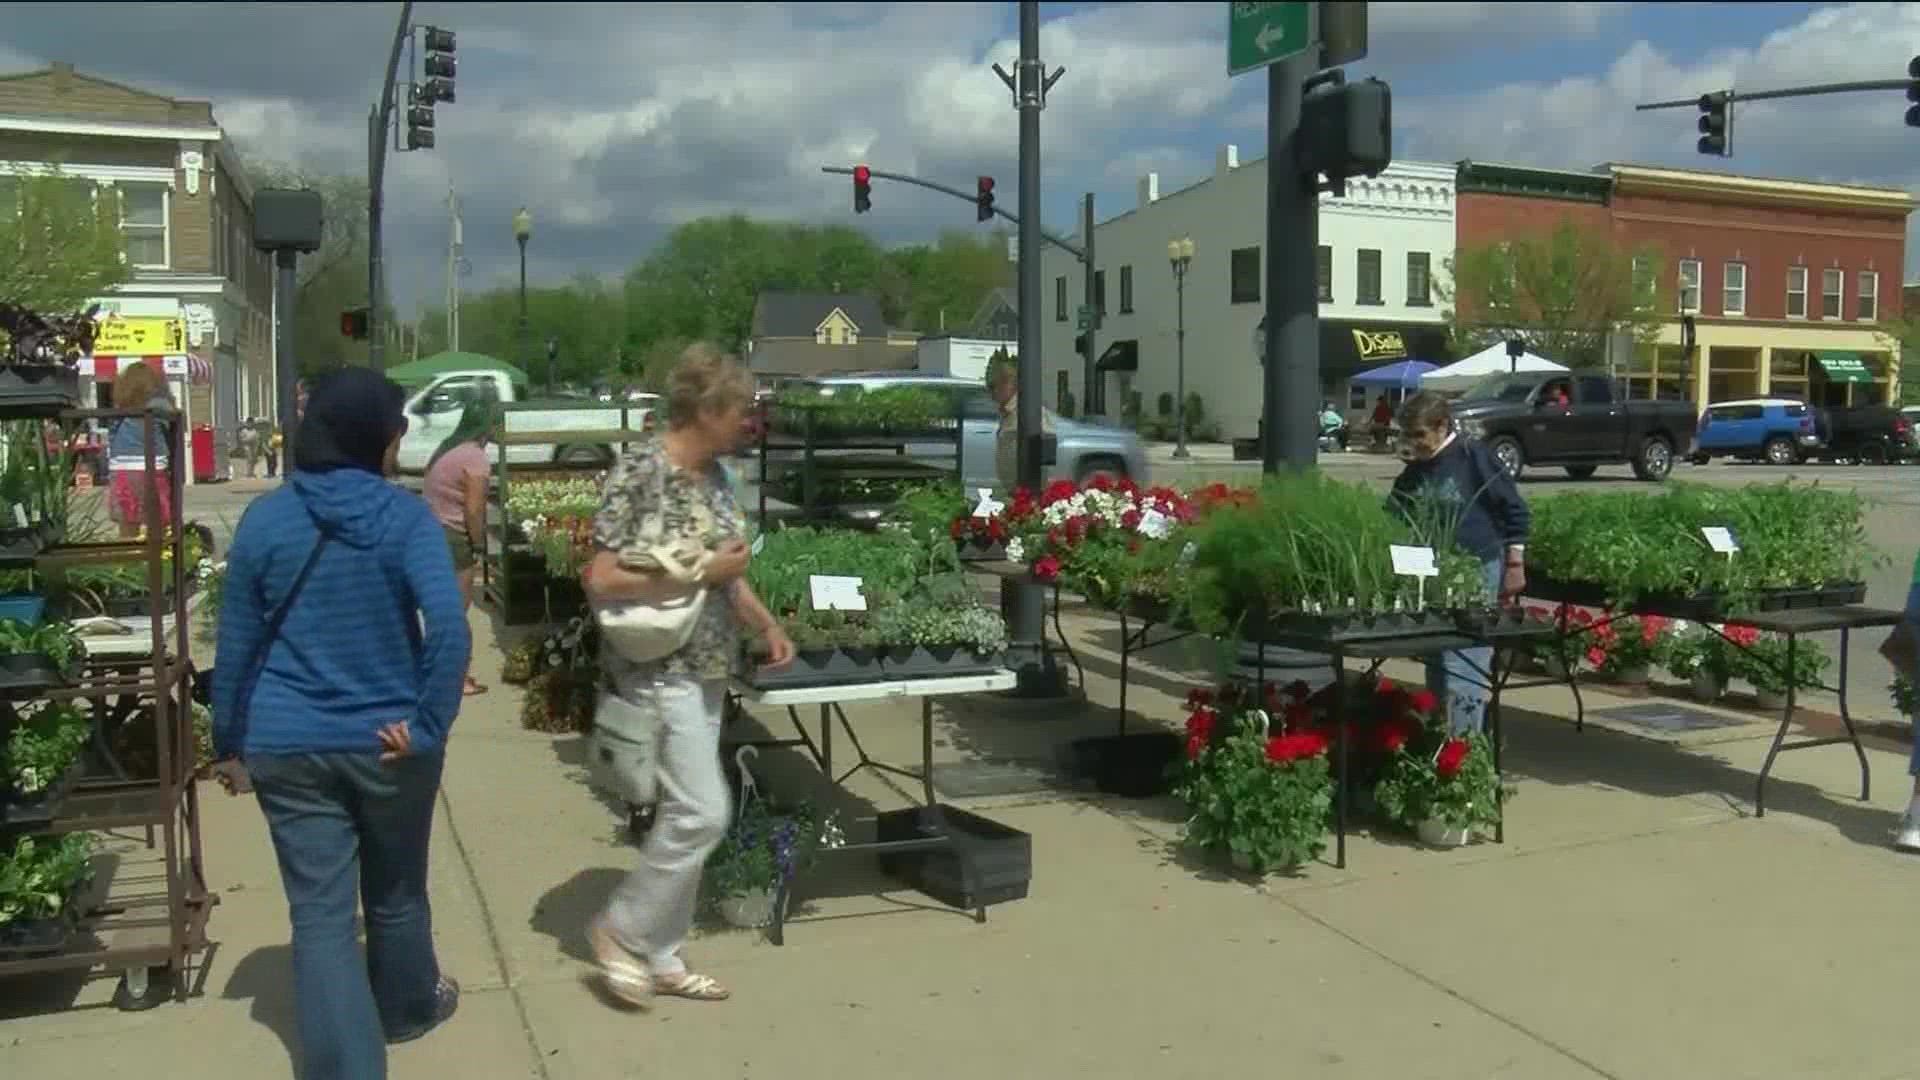 Food trucks, flower trucks and many other local vendors will gather for the Farmer's Market. The Perrysburg Farmer's Market will be every Thursday from 3-8 p.m.